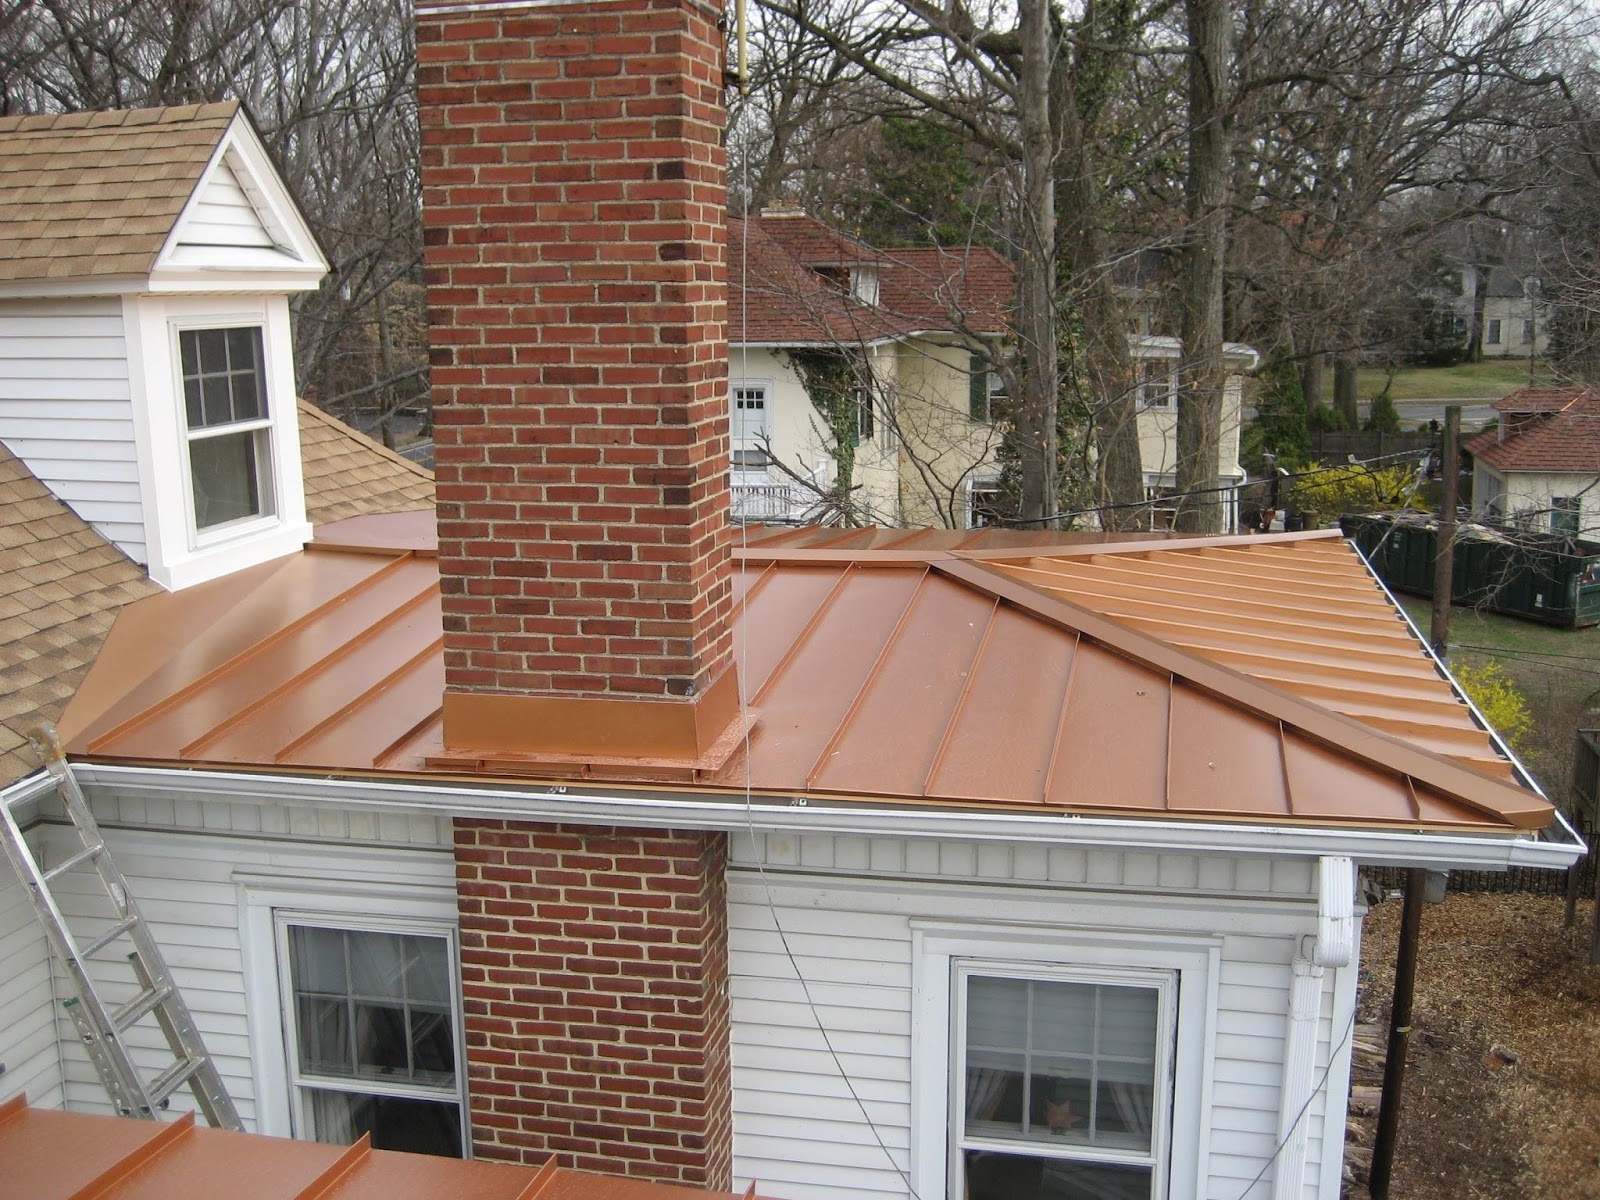 The Best Flat Roof Covering Options